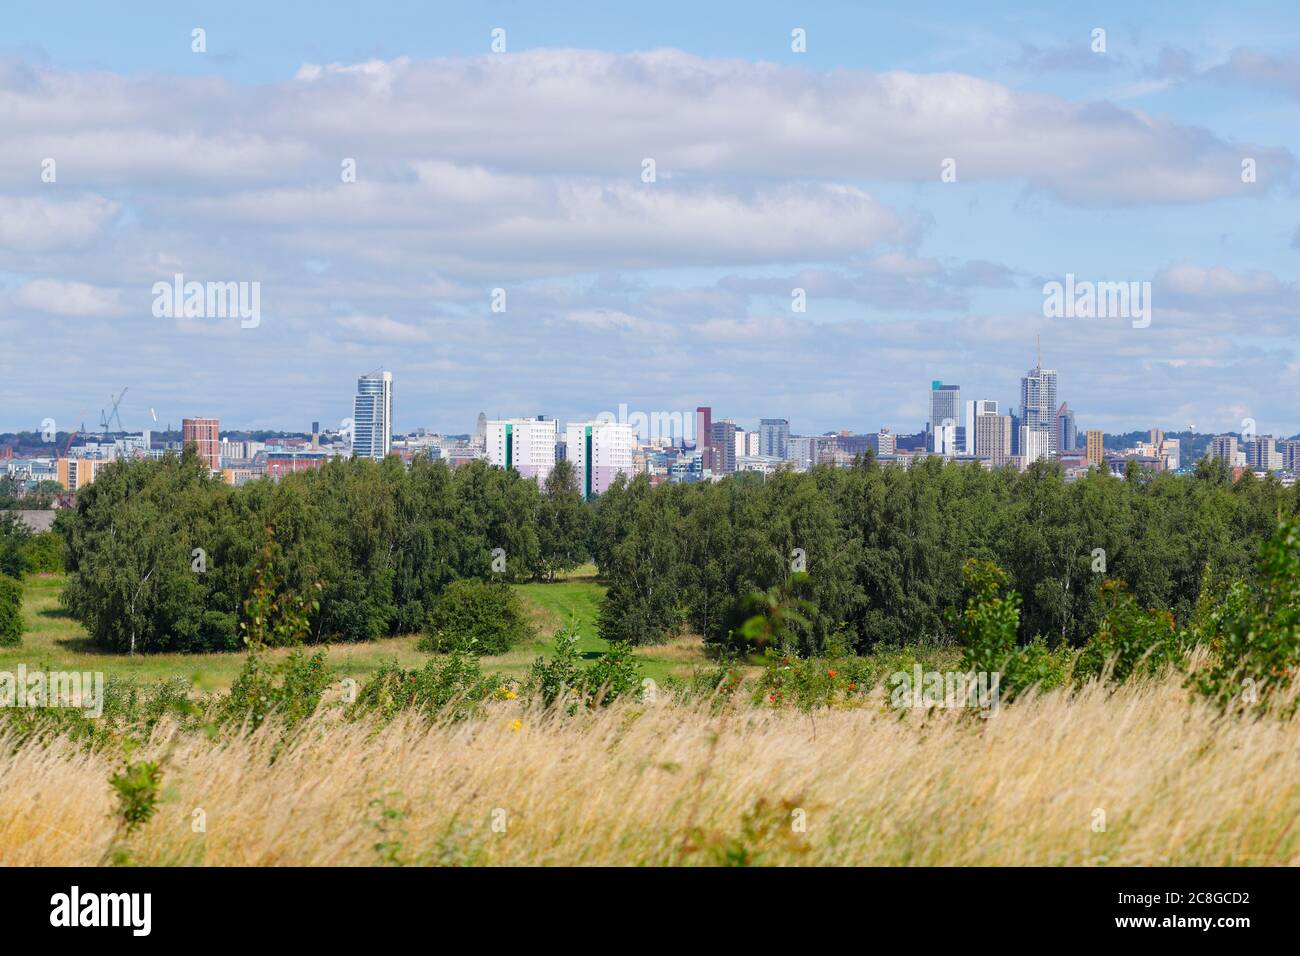 Leeds city skyline with Arena Village Campus student accommodation buildings dominating the skyline. Stock Photo